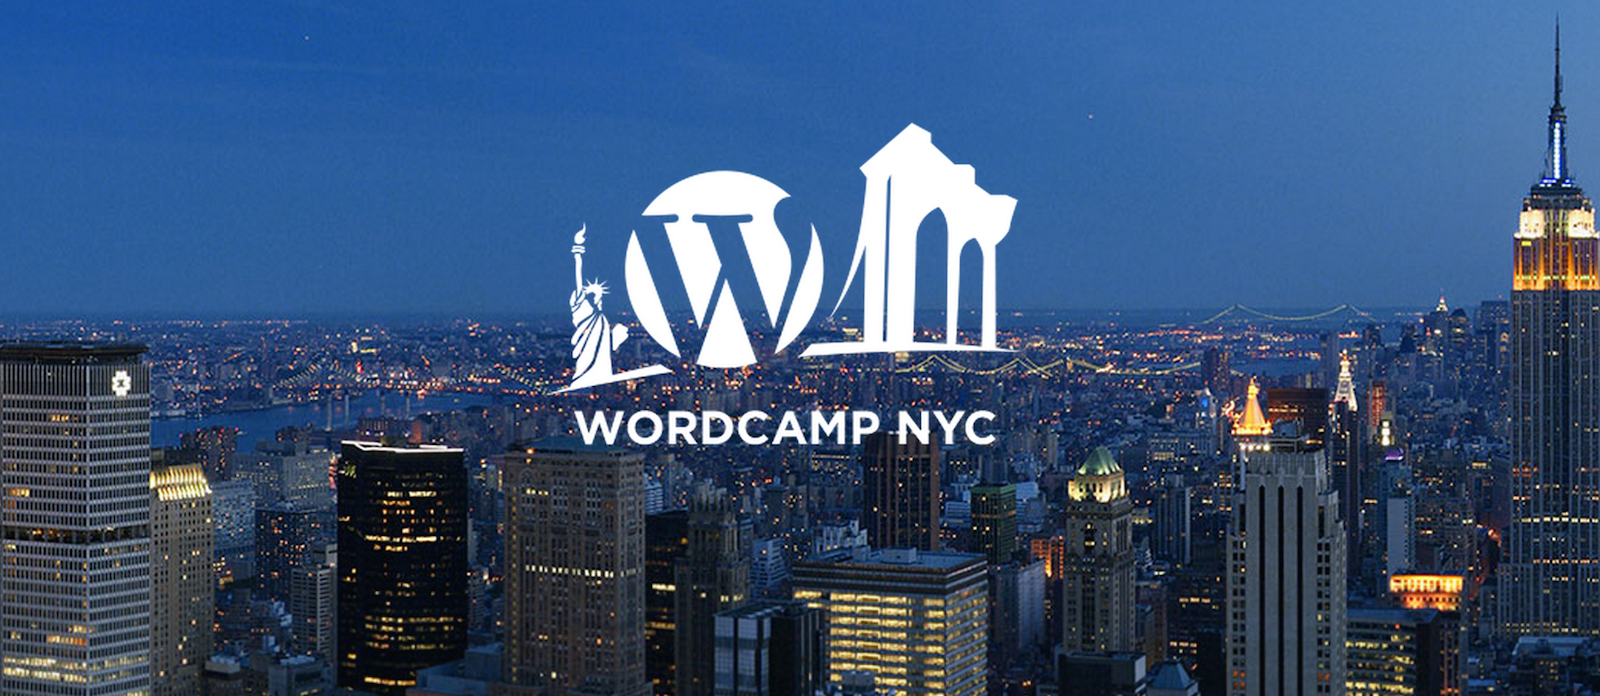 Summer in the City: WordCamp NYC Dates Set For August 2-3, 2014